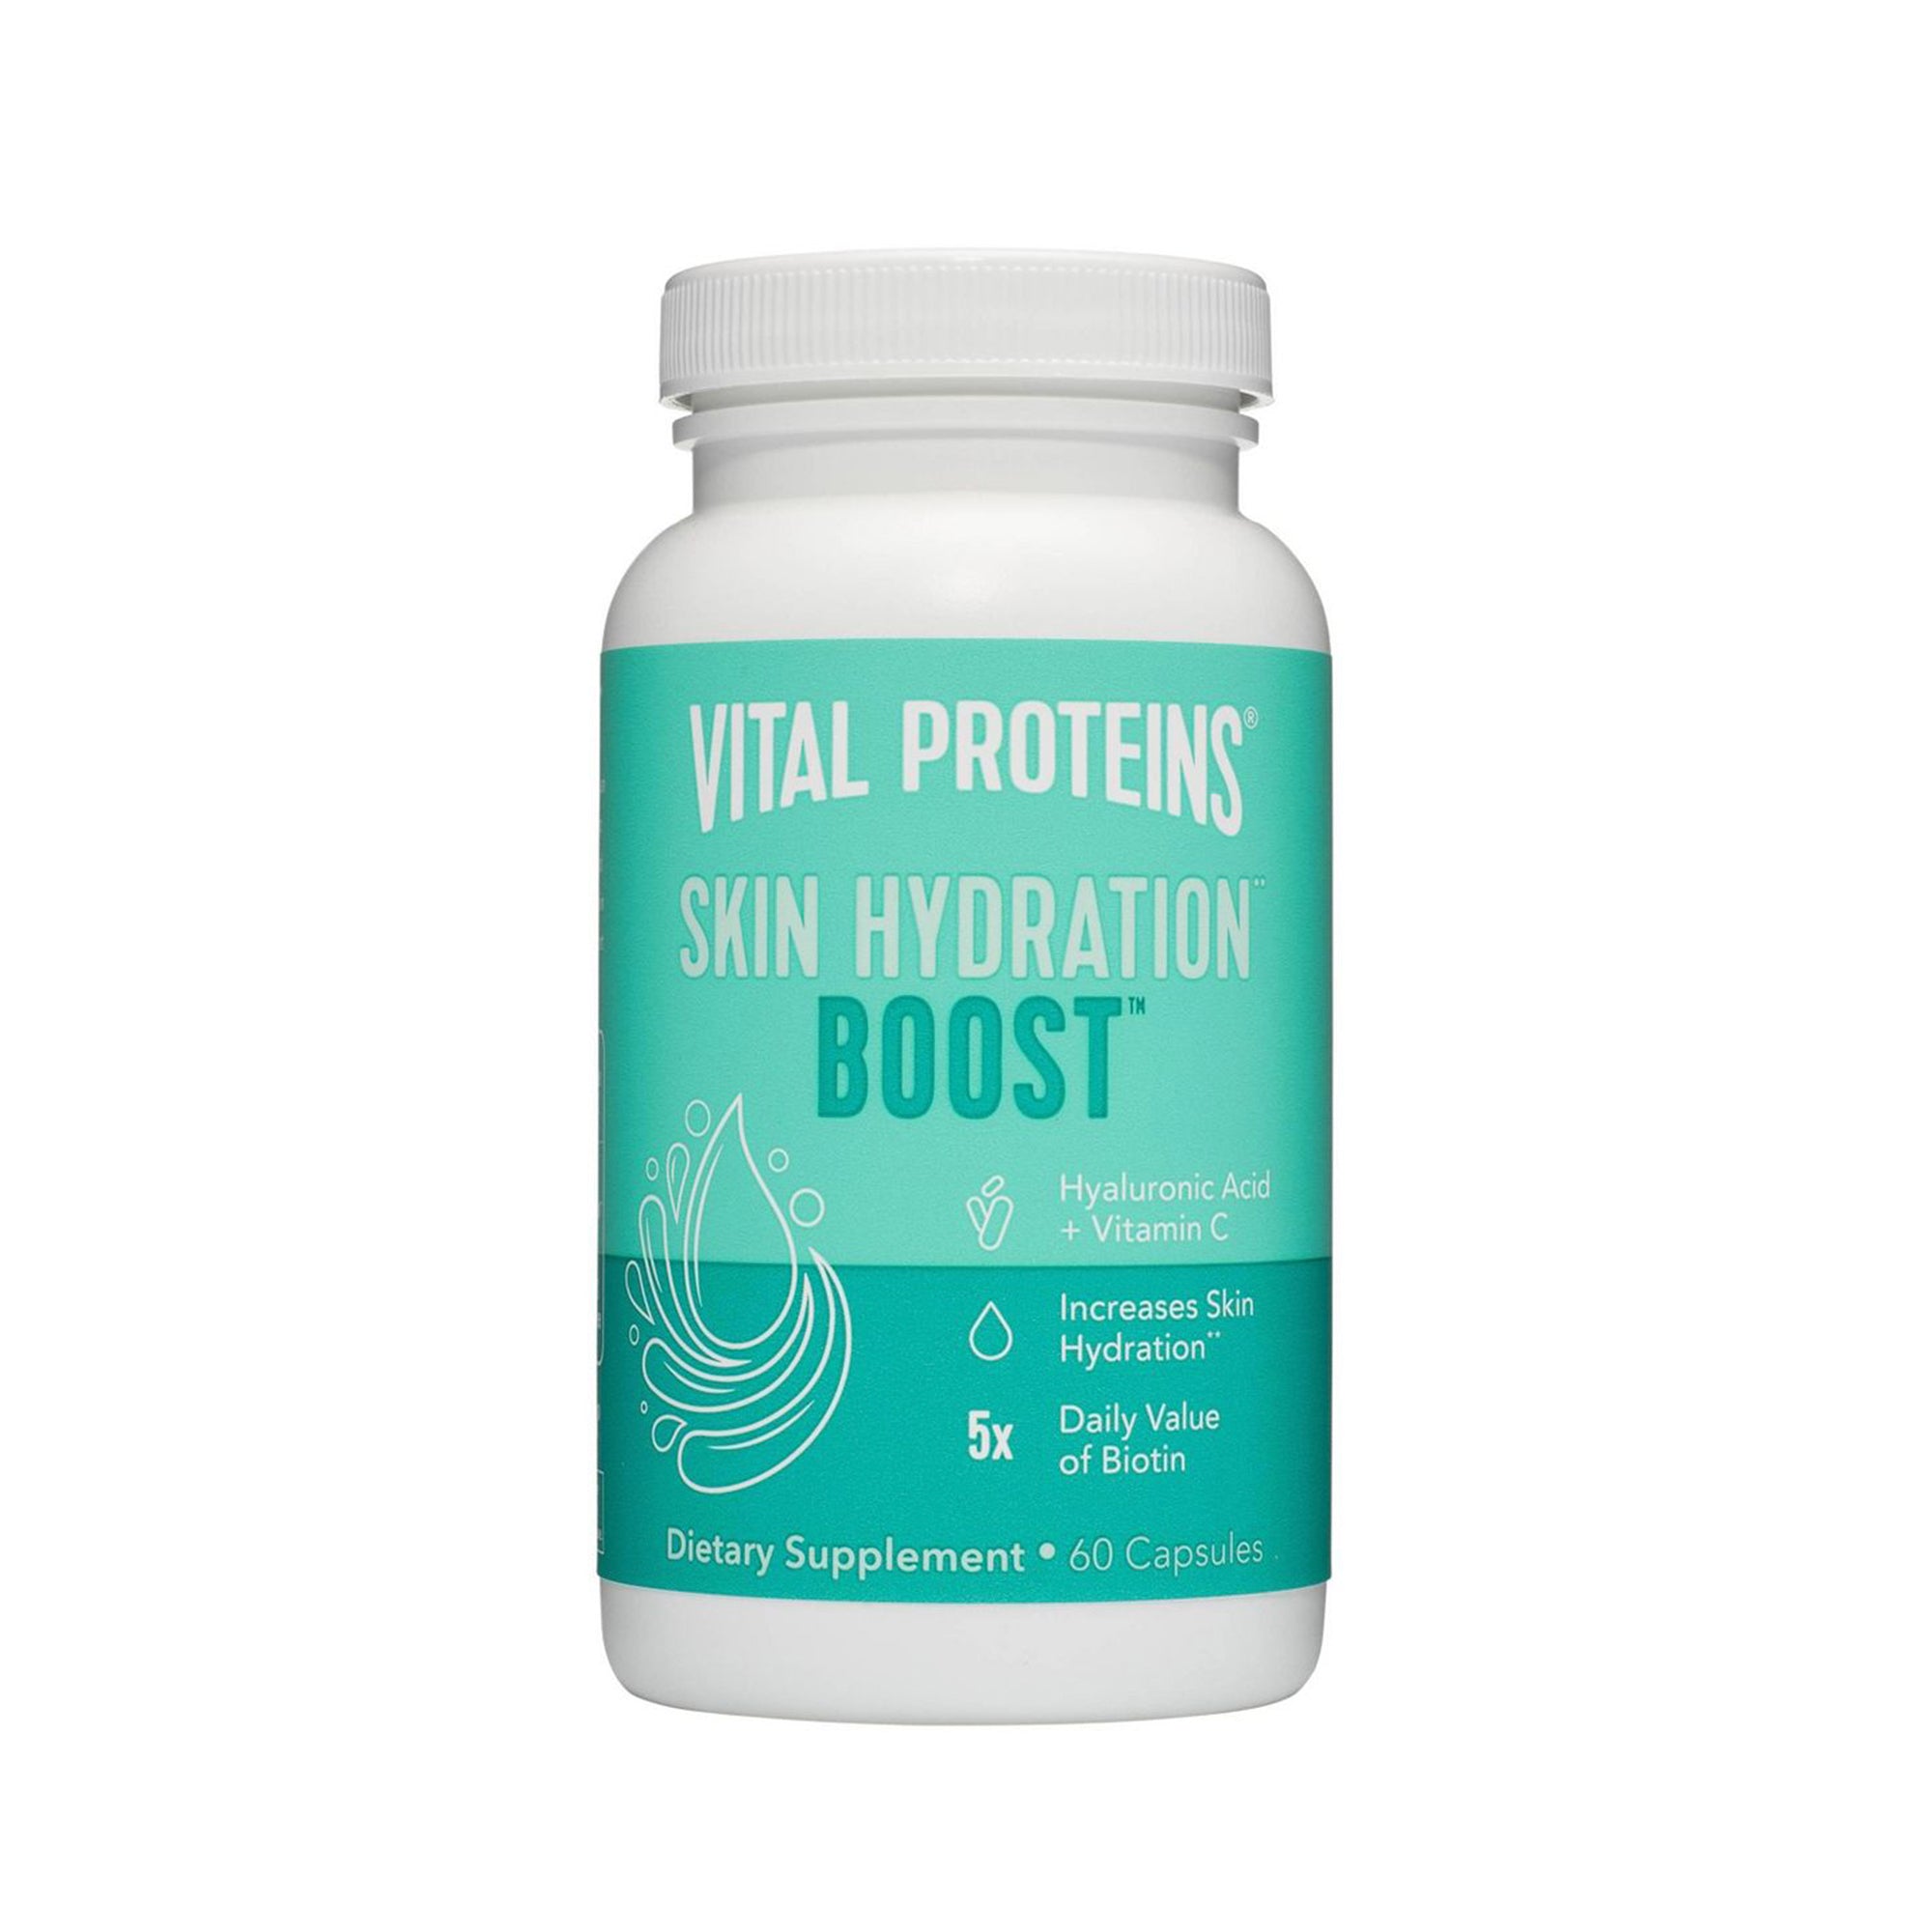 Vital Proteins Skin Hydration Boost Vegan Capsules 60 Count